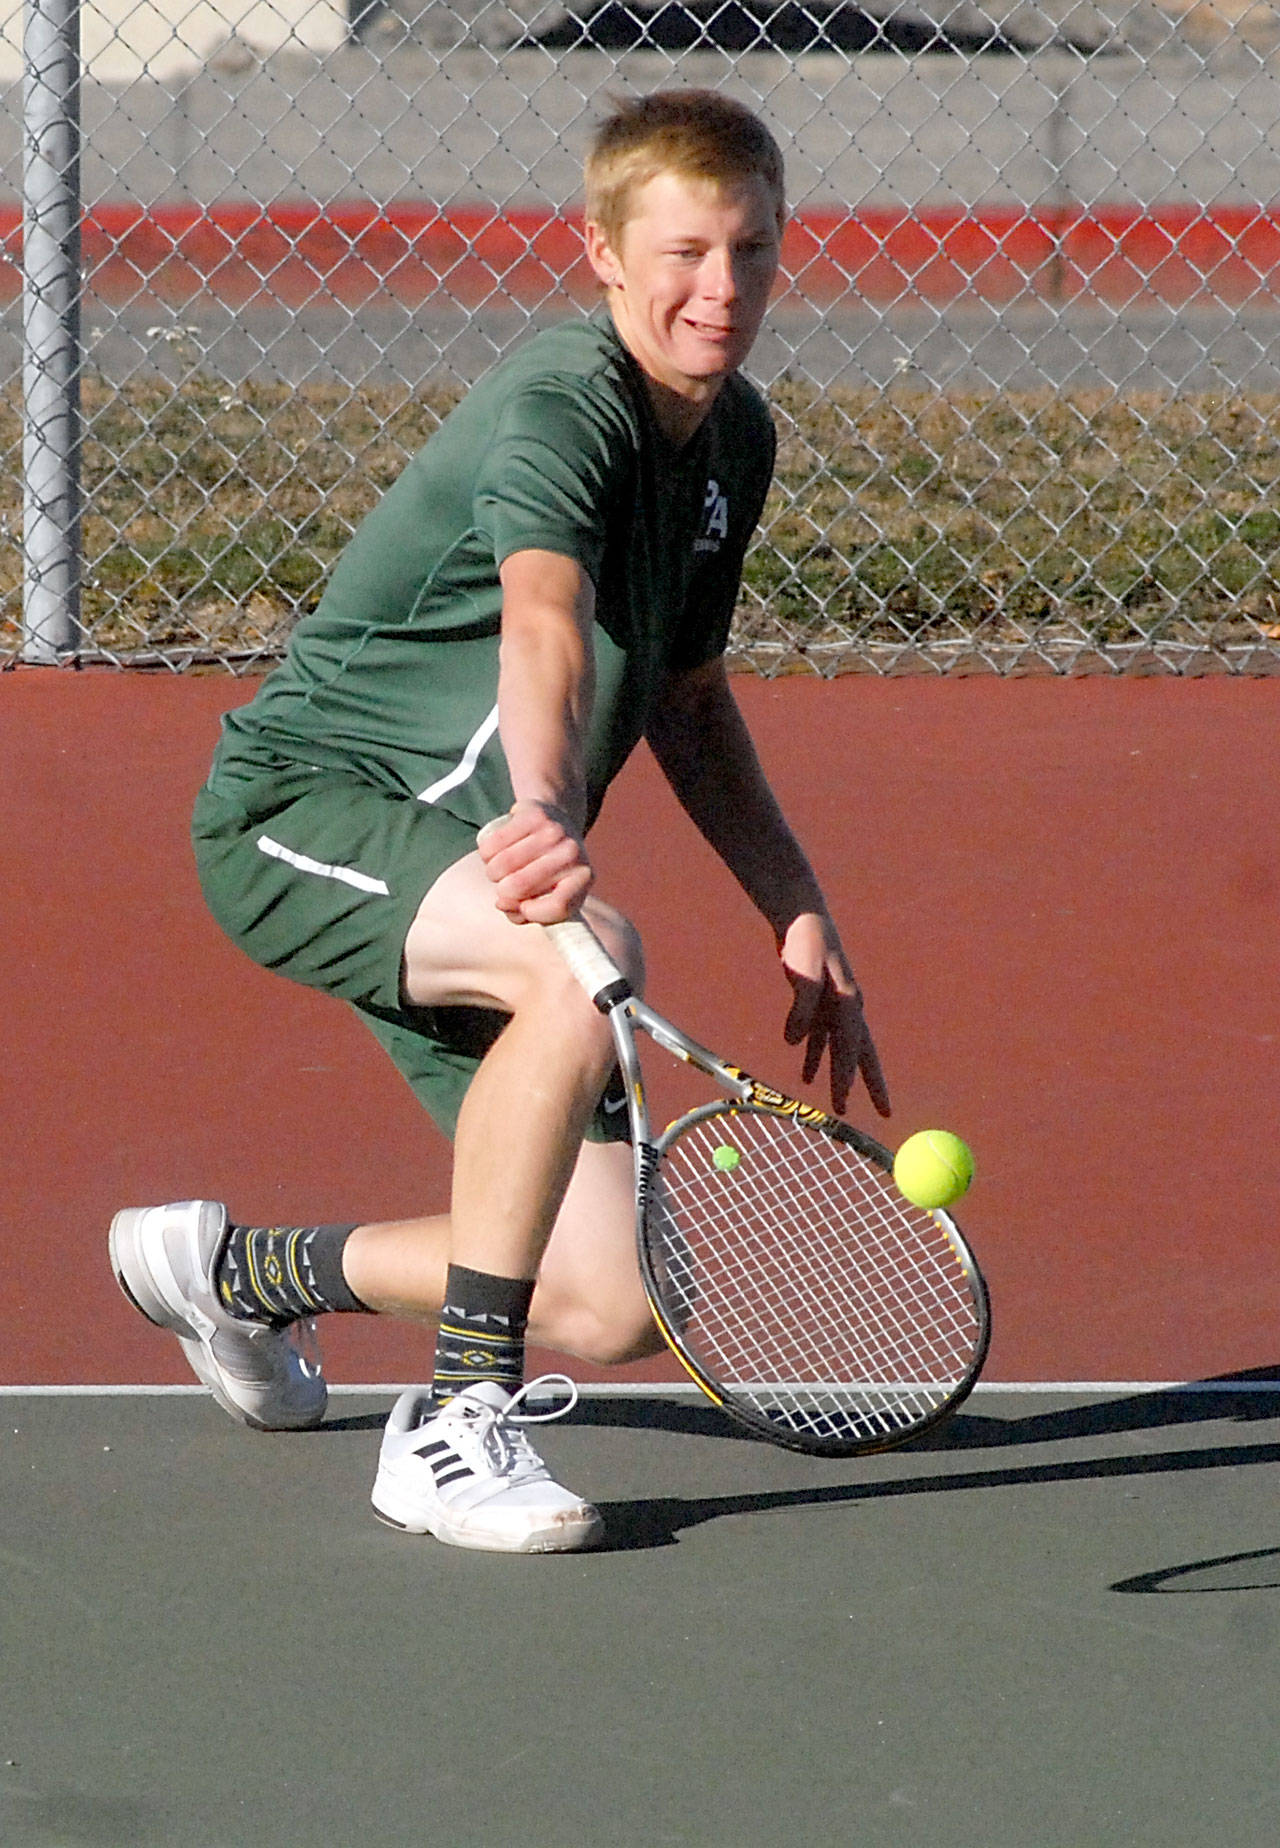 Port Angeles’ Hayden Woods returns the ball in his singles match against Kingston’s Ethan Griffin on Tuesday at Port Angeles High School.                                Keith Thorpe/Peninsula Daily News